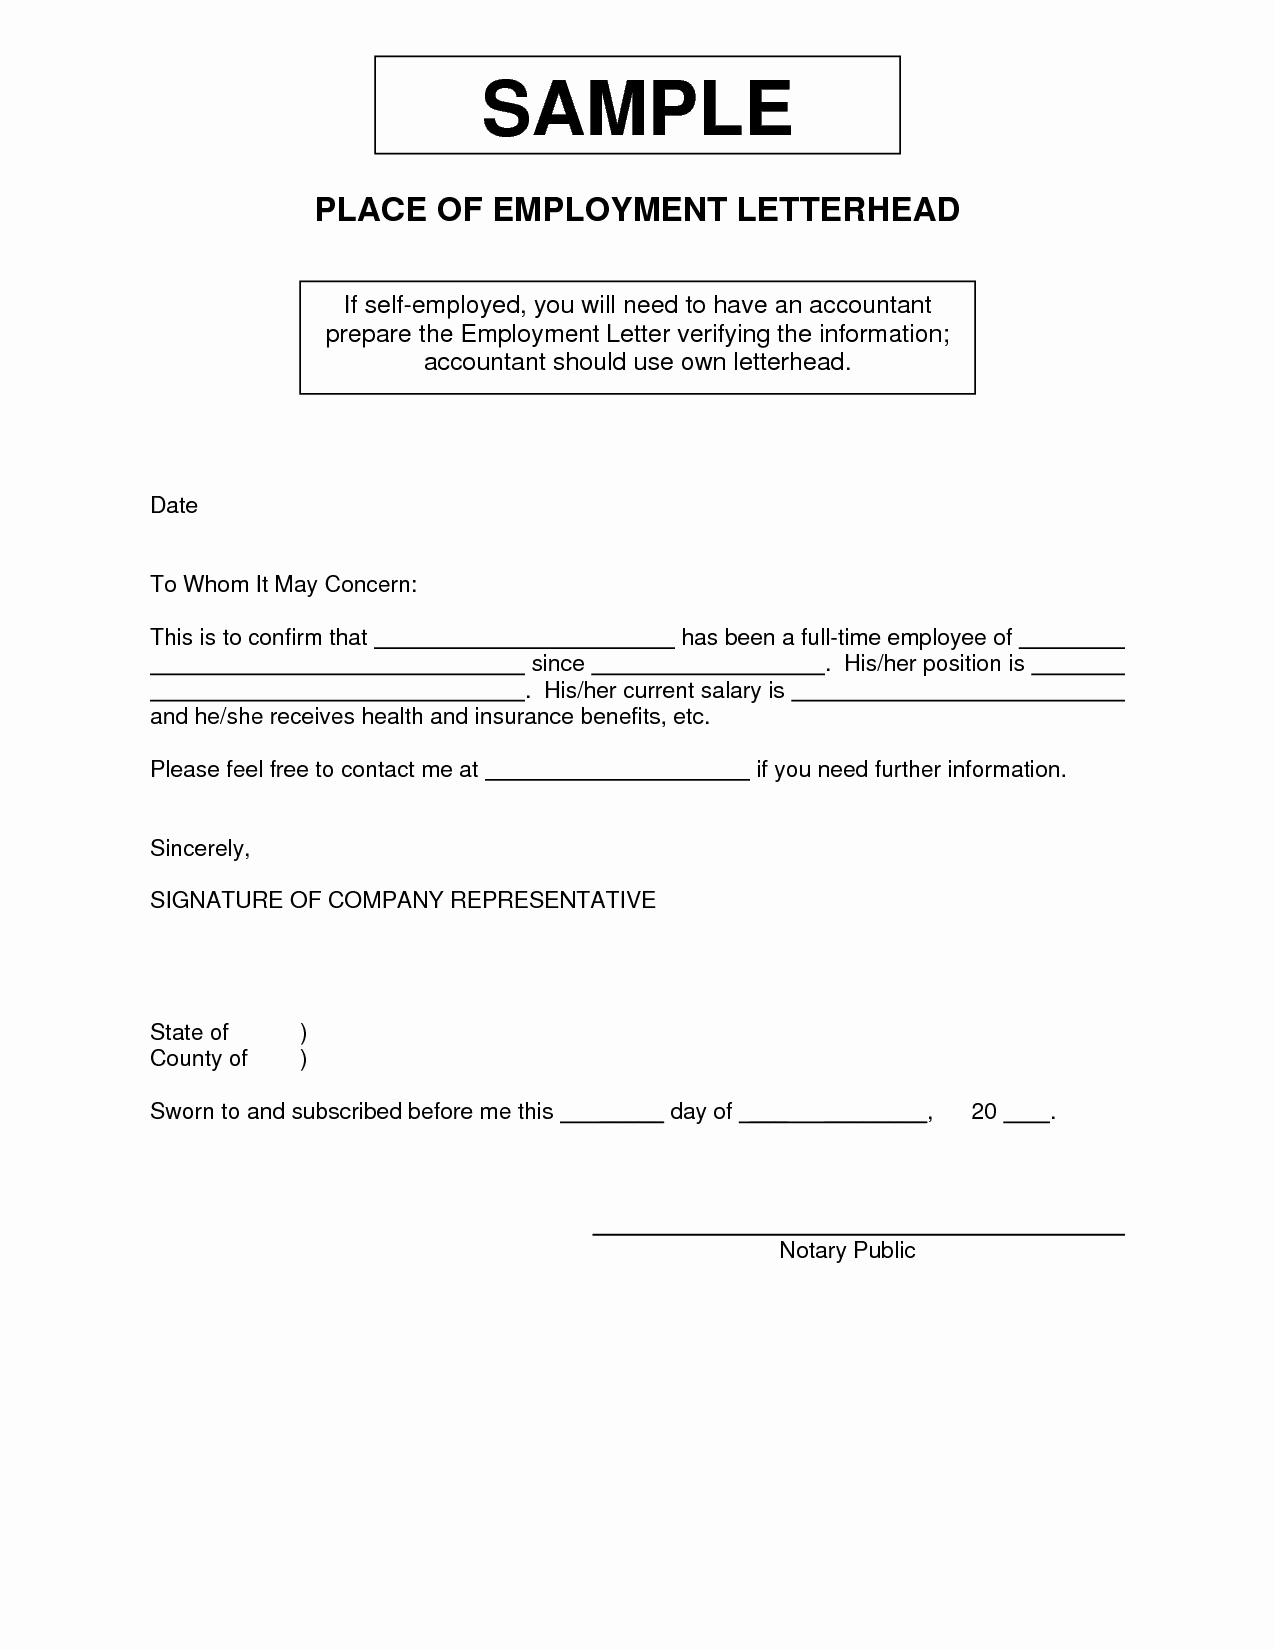 Sample Letter Of Employement New Cpa Letter for Self Employed Template Examples